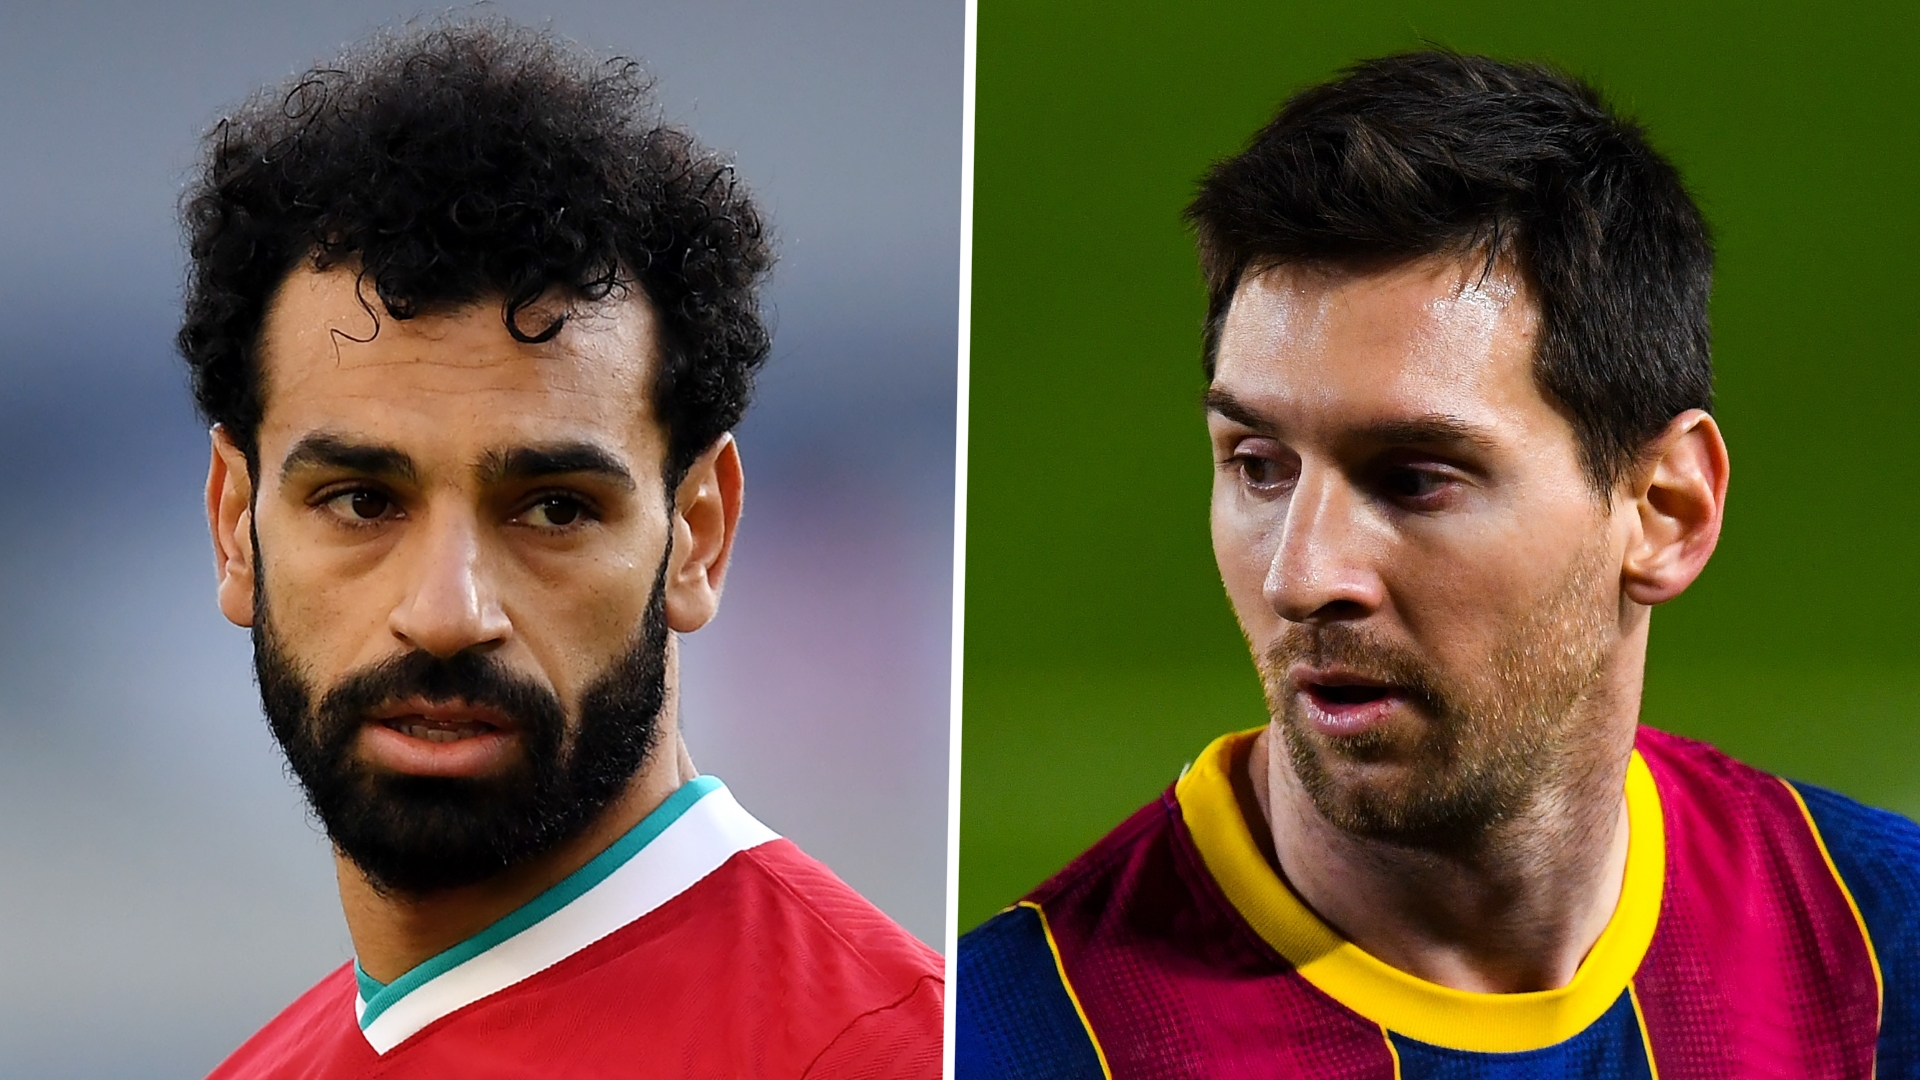 'Salah is the Messi of Africa' - Liverpool star's achievements compared to Barcelona icon by Bayern chief Rummenigge